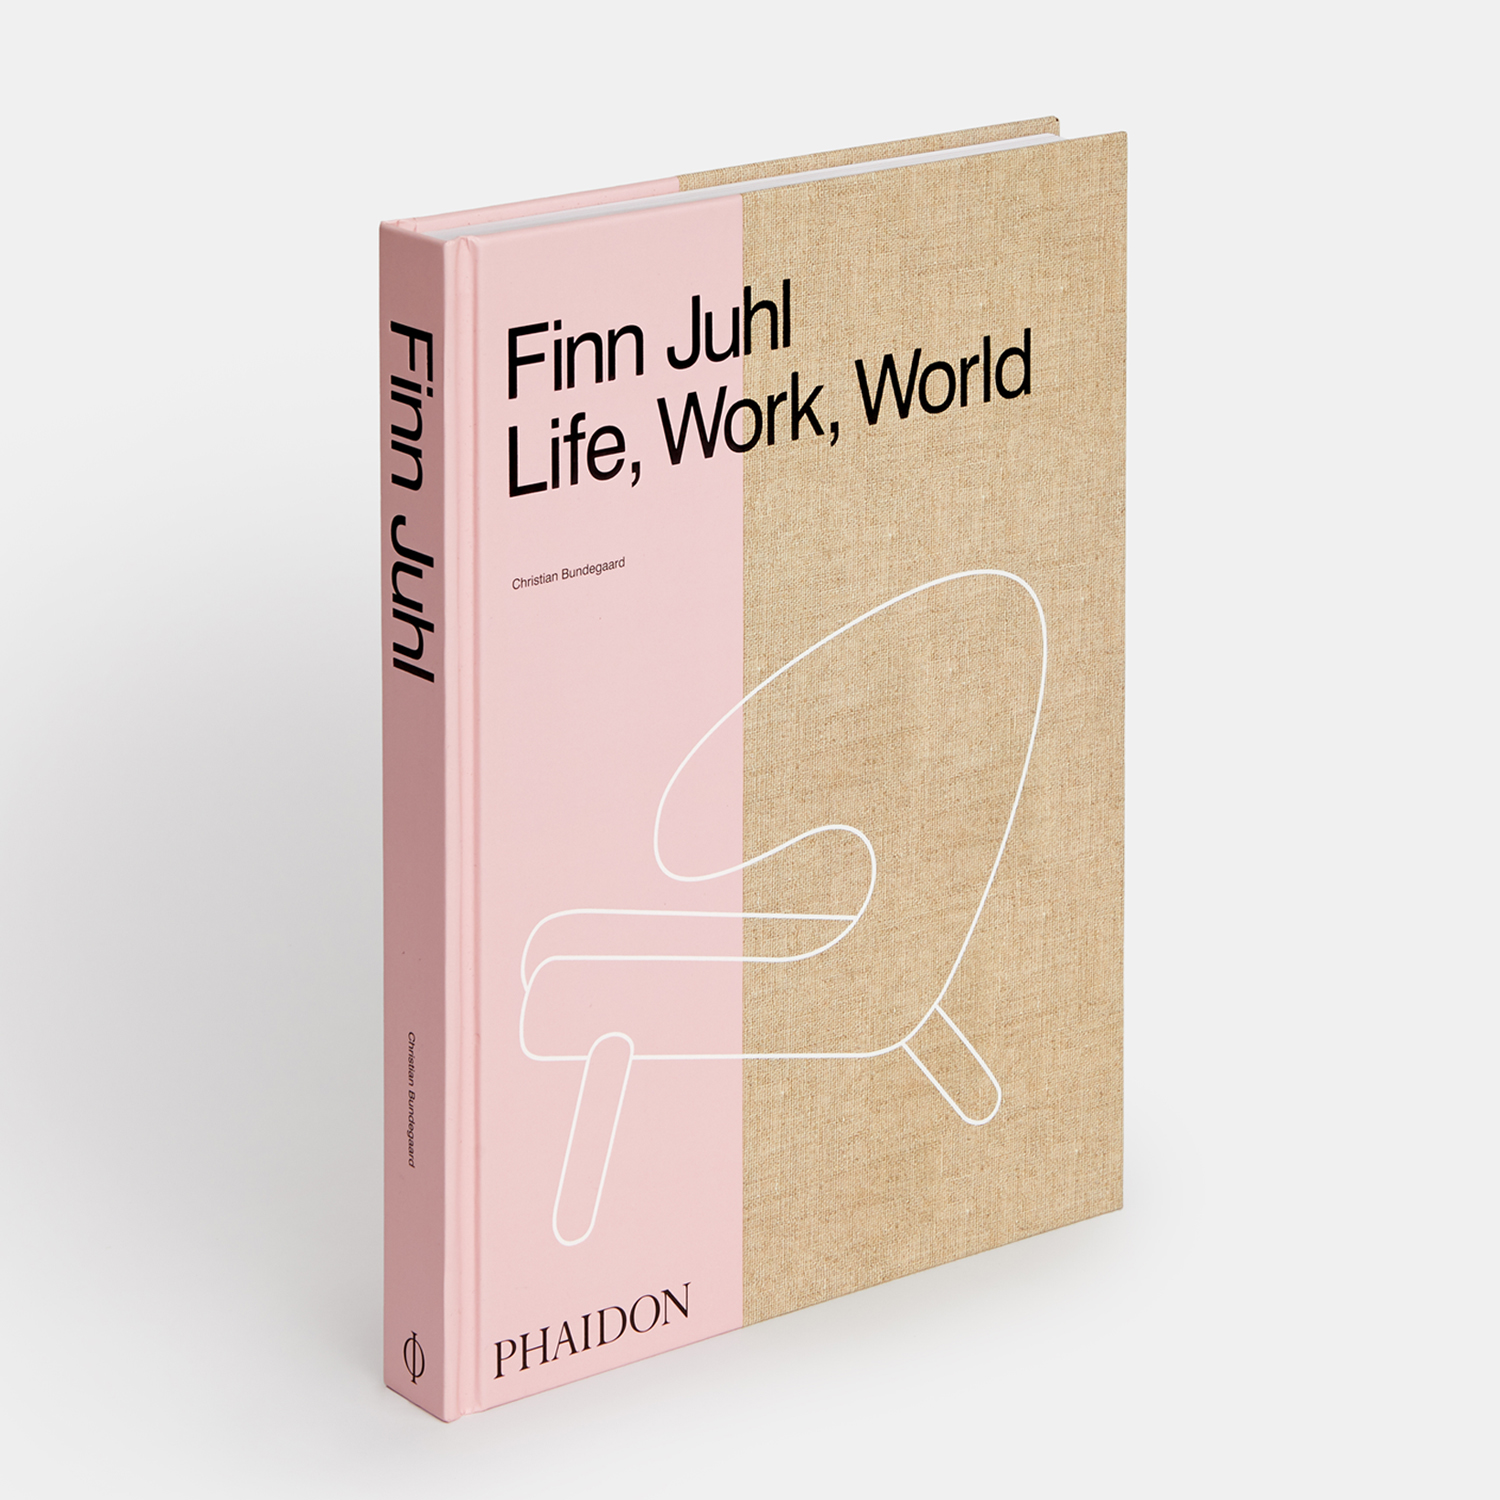 All you need to know about Finn Juhl: Life, Work, World